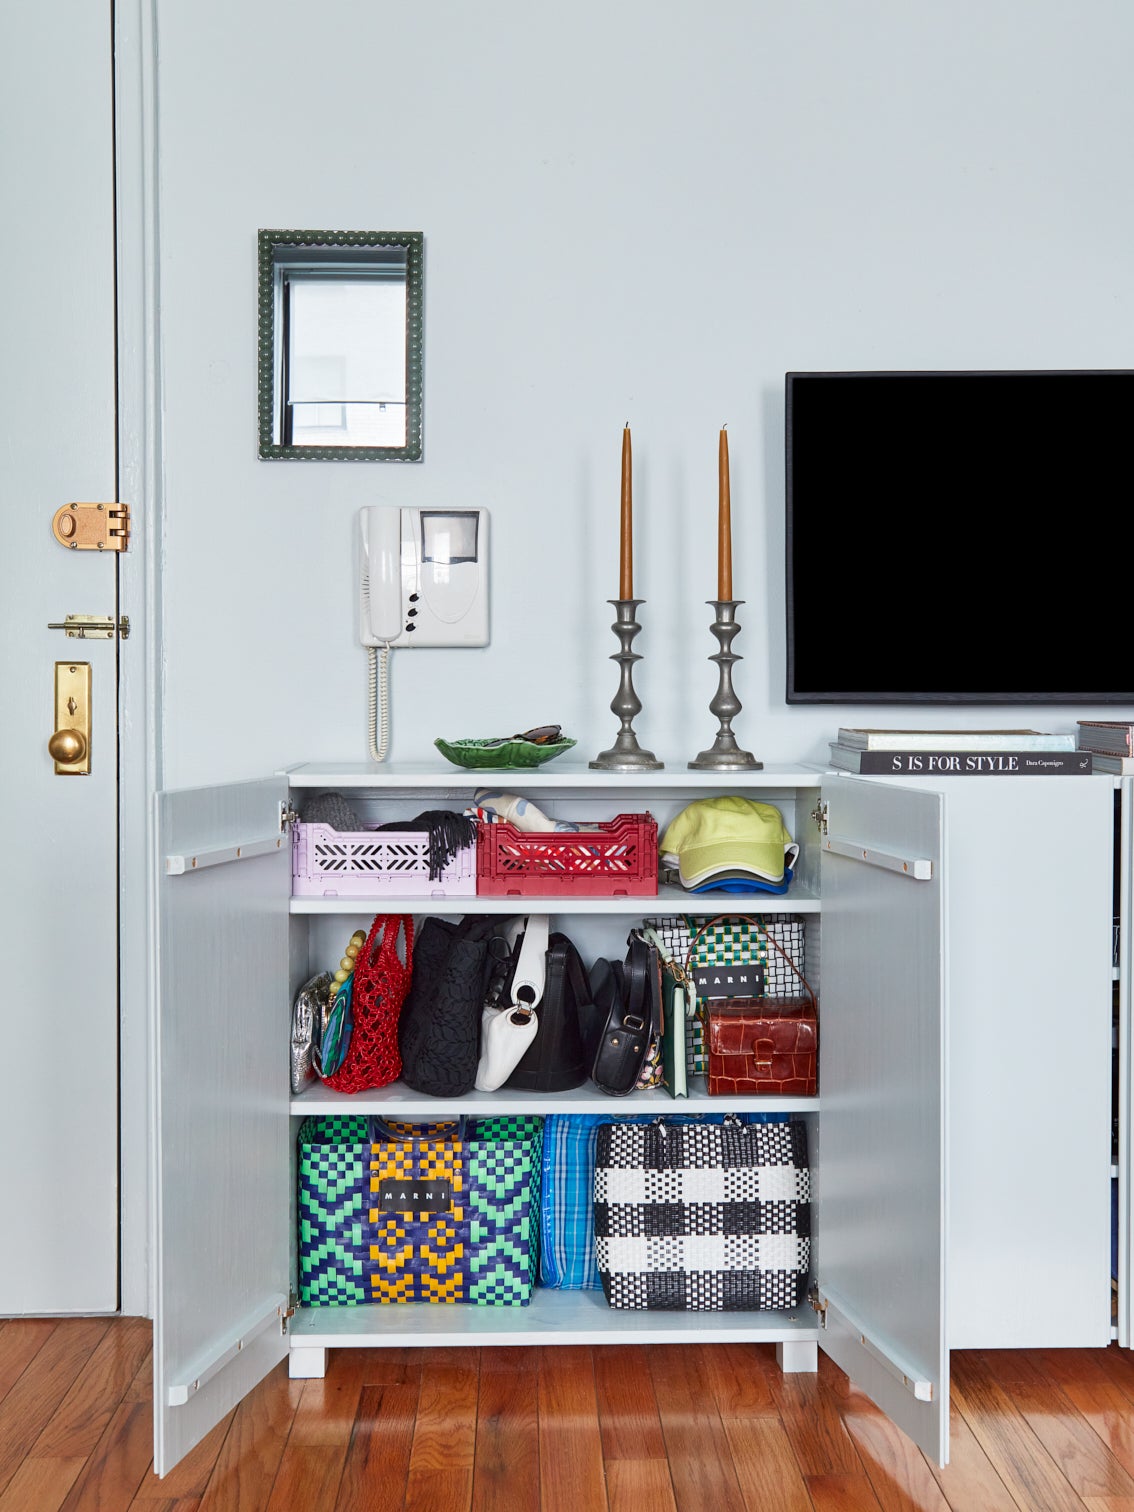 These IKEA Cabinets Hold Everything the Tiny Closet in My Studio Apartment Can’t